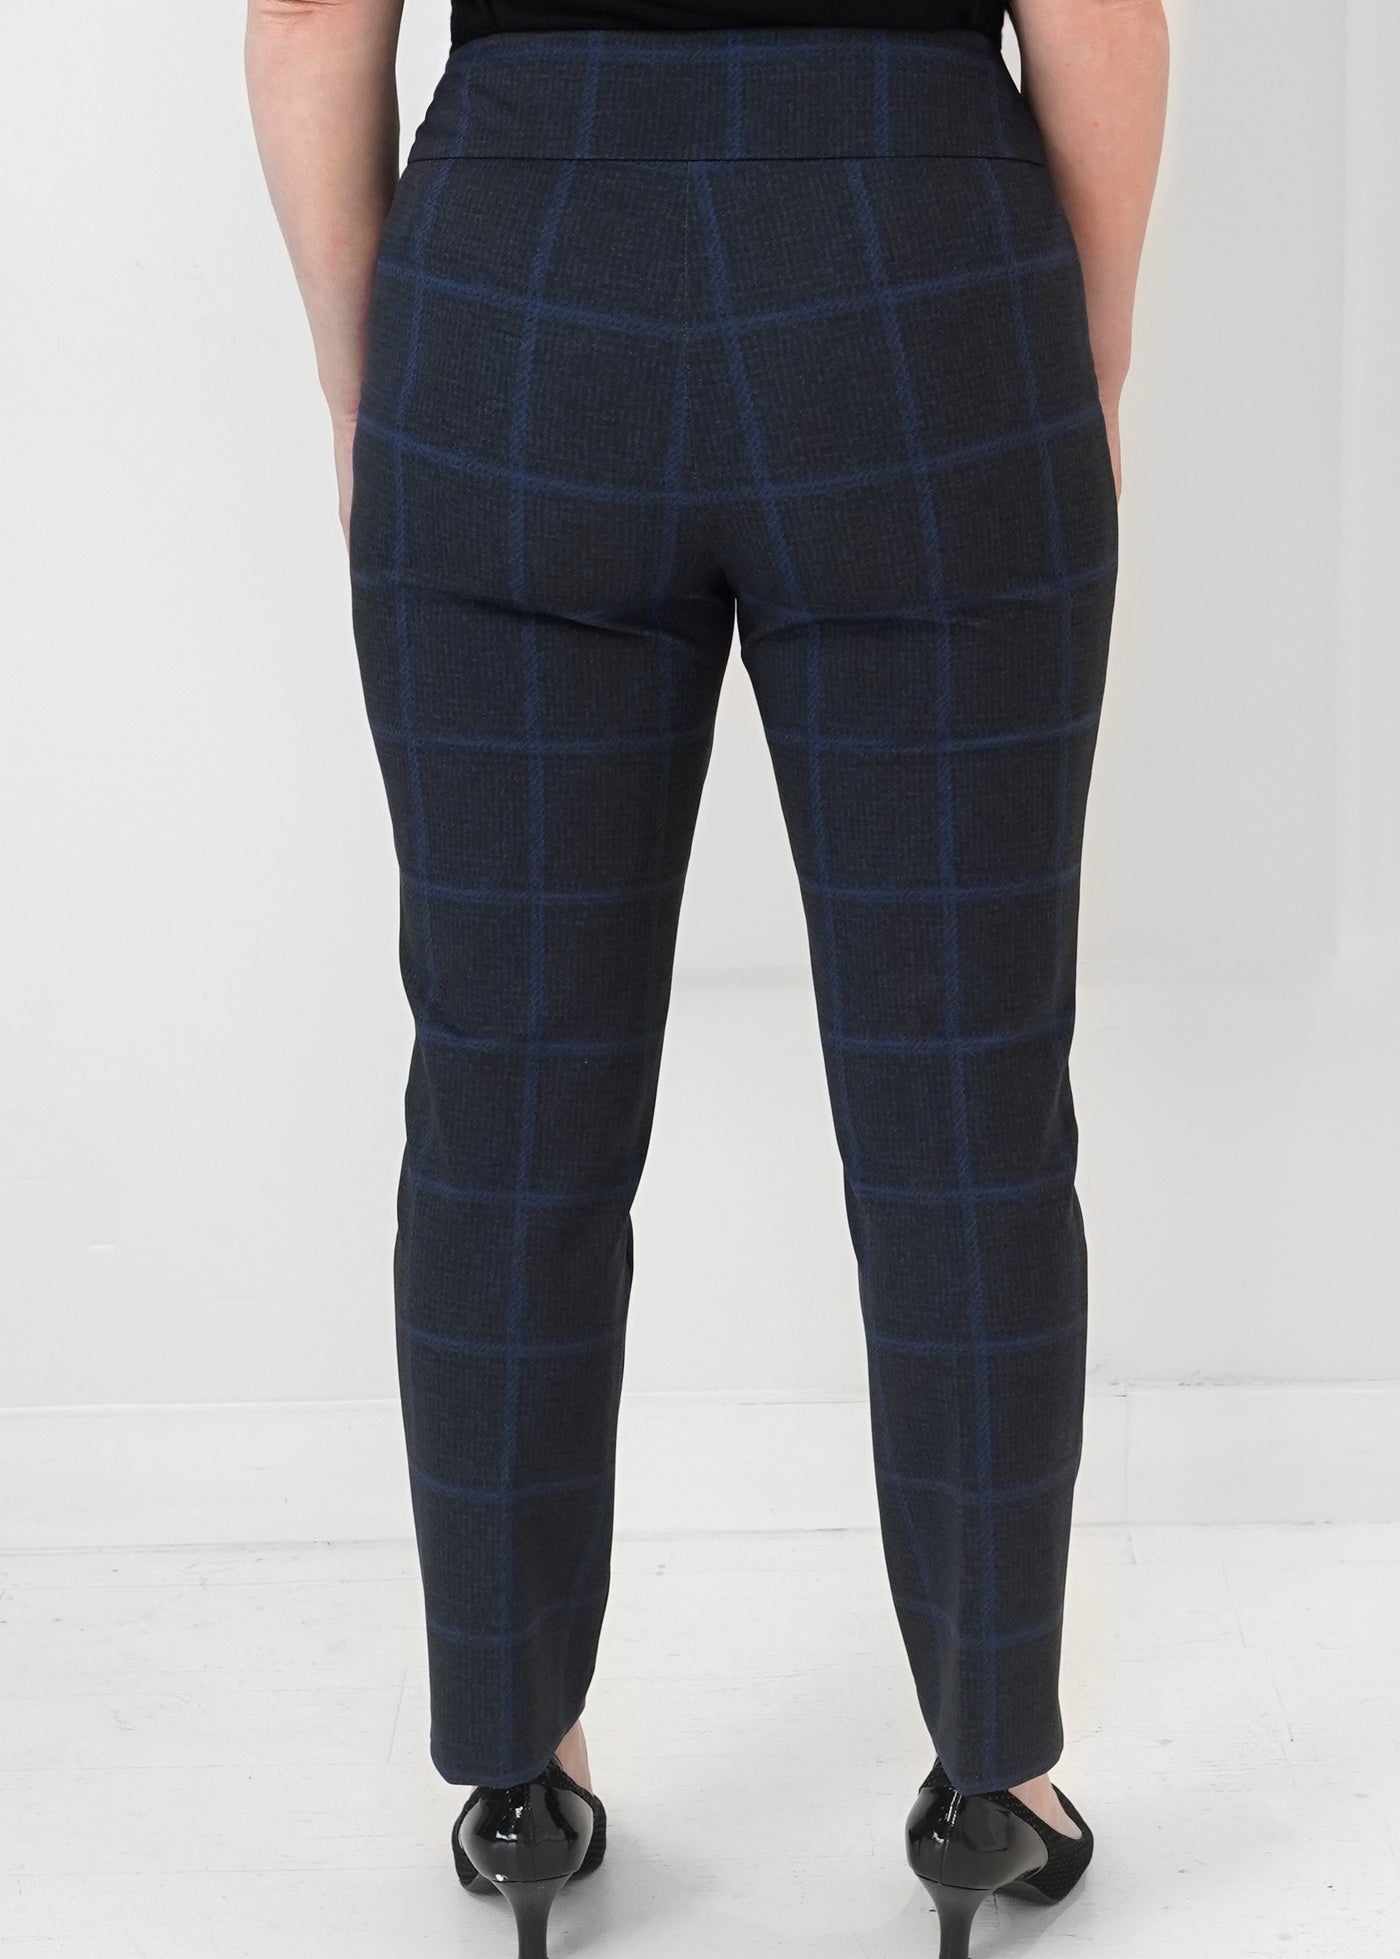 Lisette - Wexford Check 28" Ankle Pant